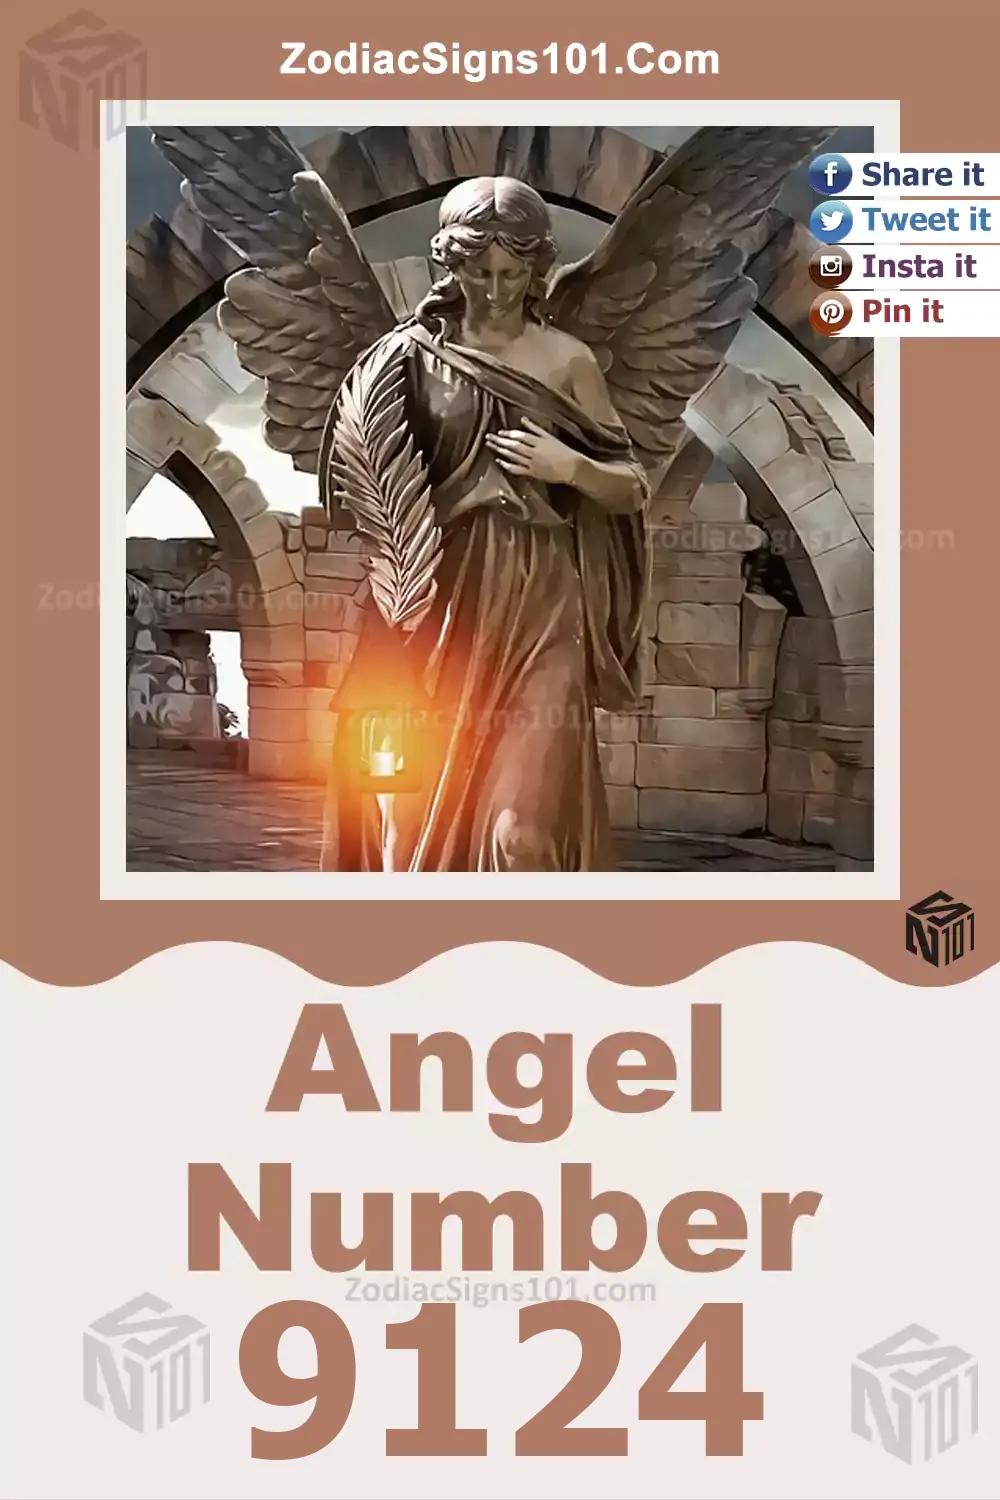 9124 Angel Number Meaning